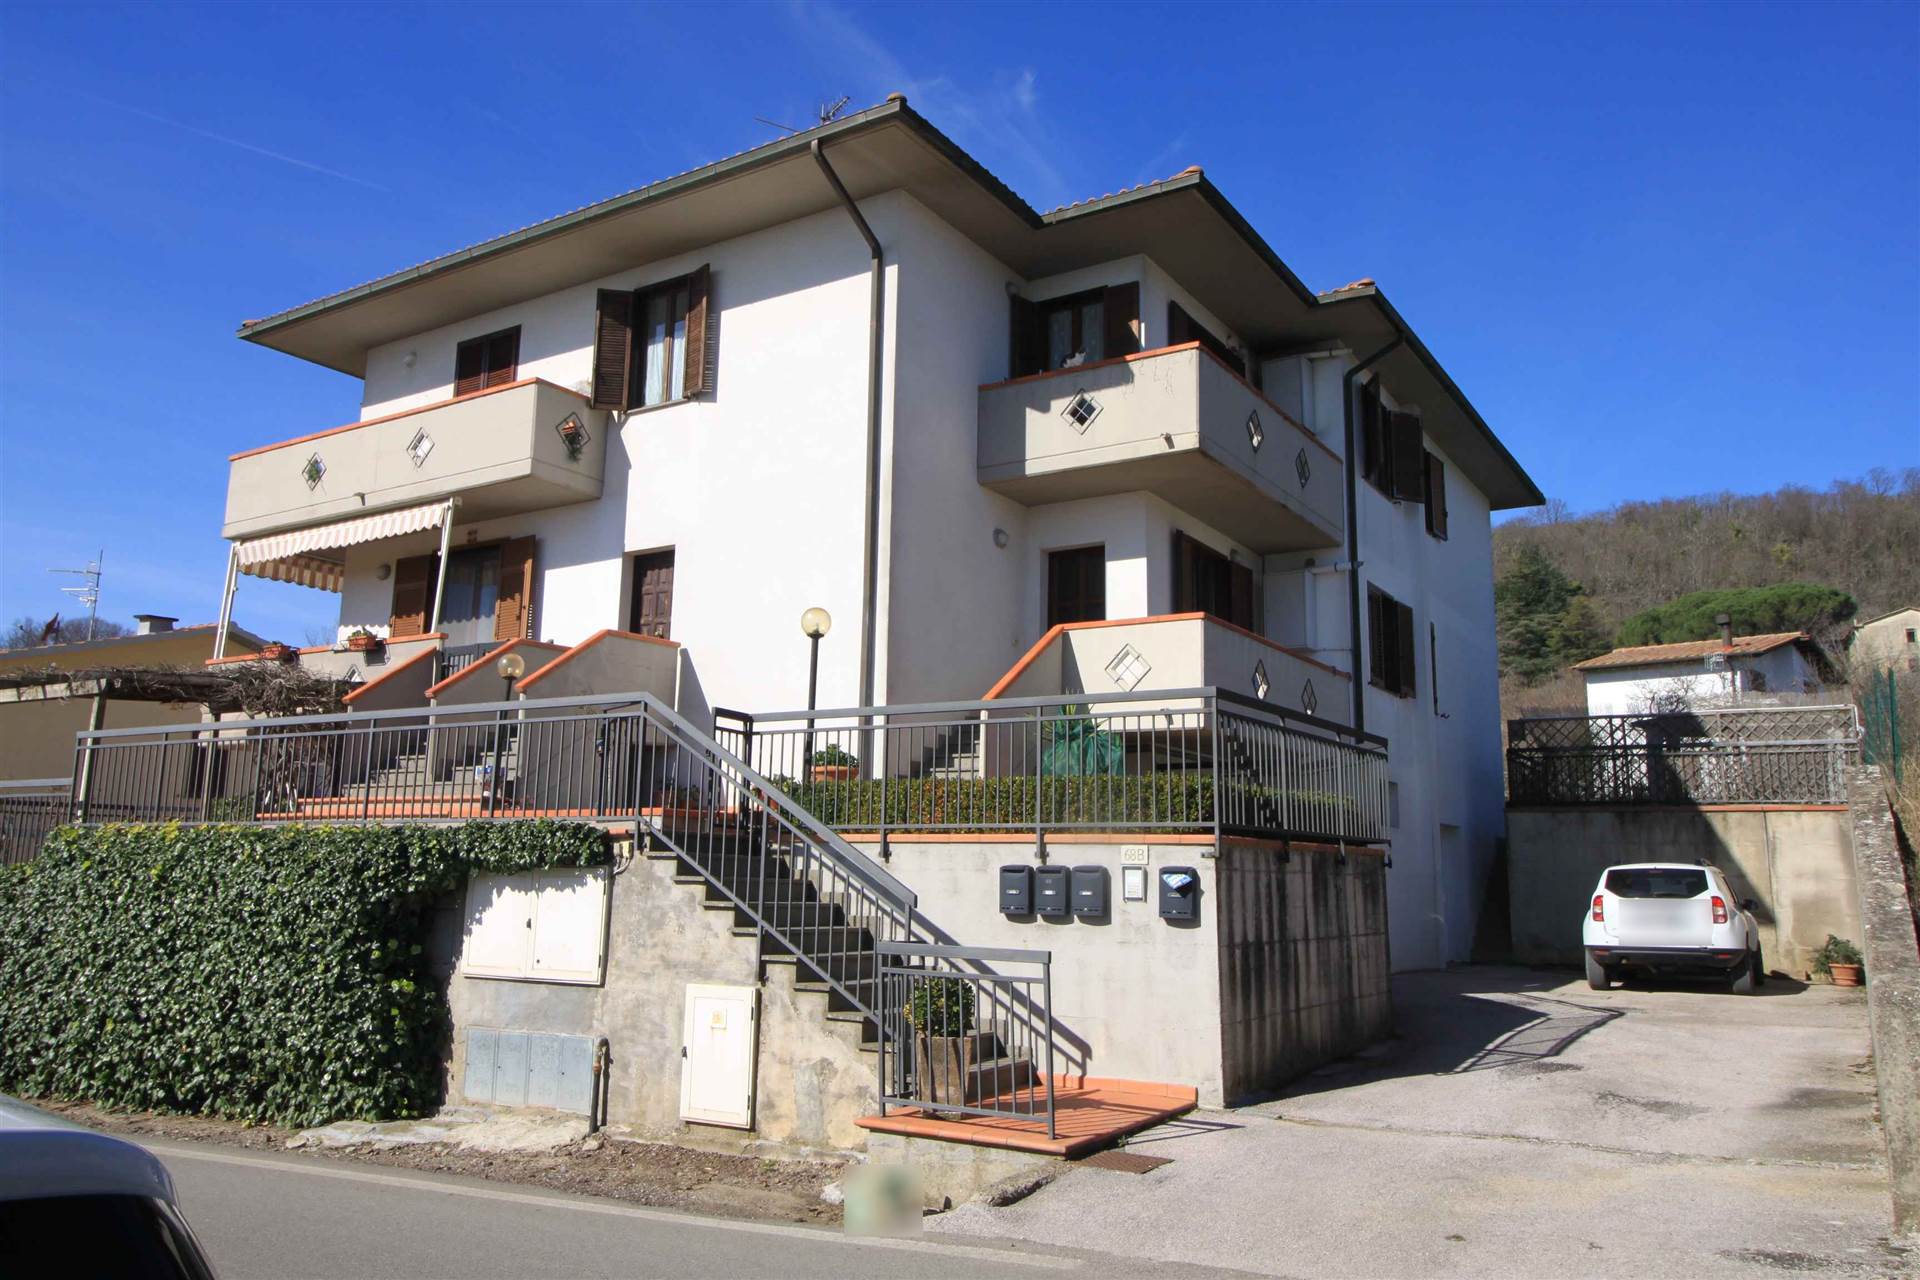 SASSOFORTINO, ROCCASTRADA, Apartment for sale of 89 Sq. mt., Excellent Condition, Heating Individual heating system, Energetic class: G, placed at 1° 